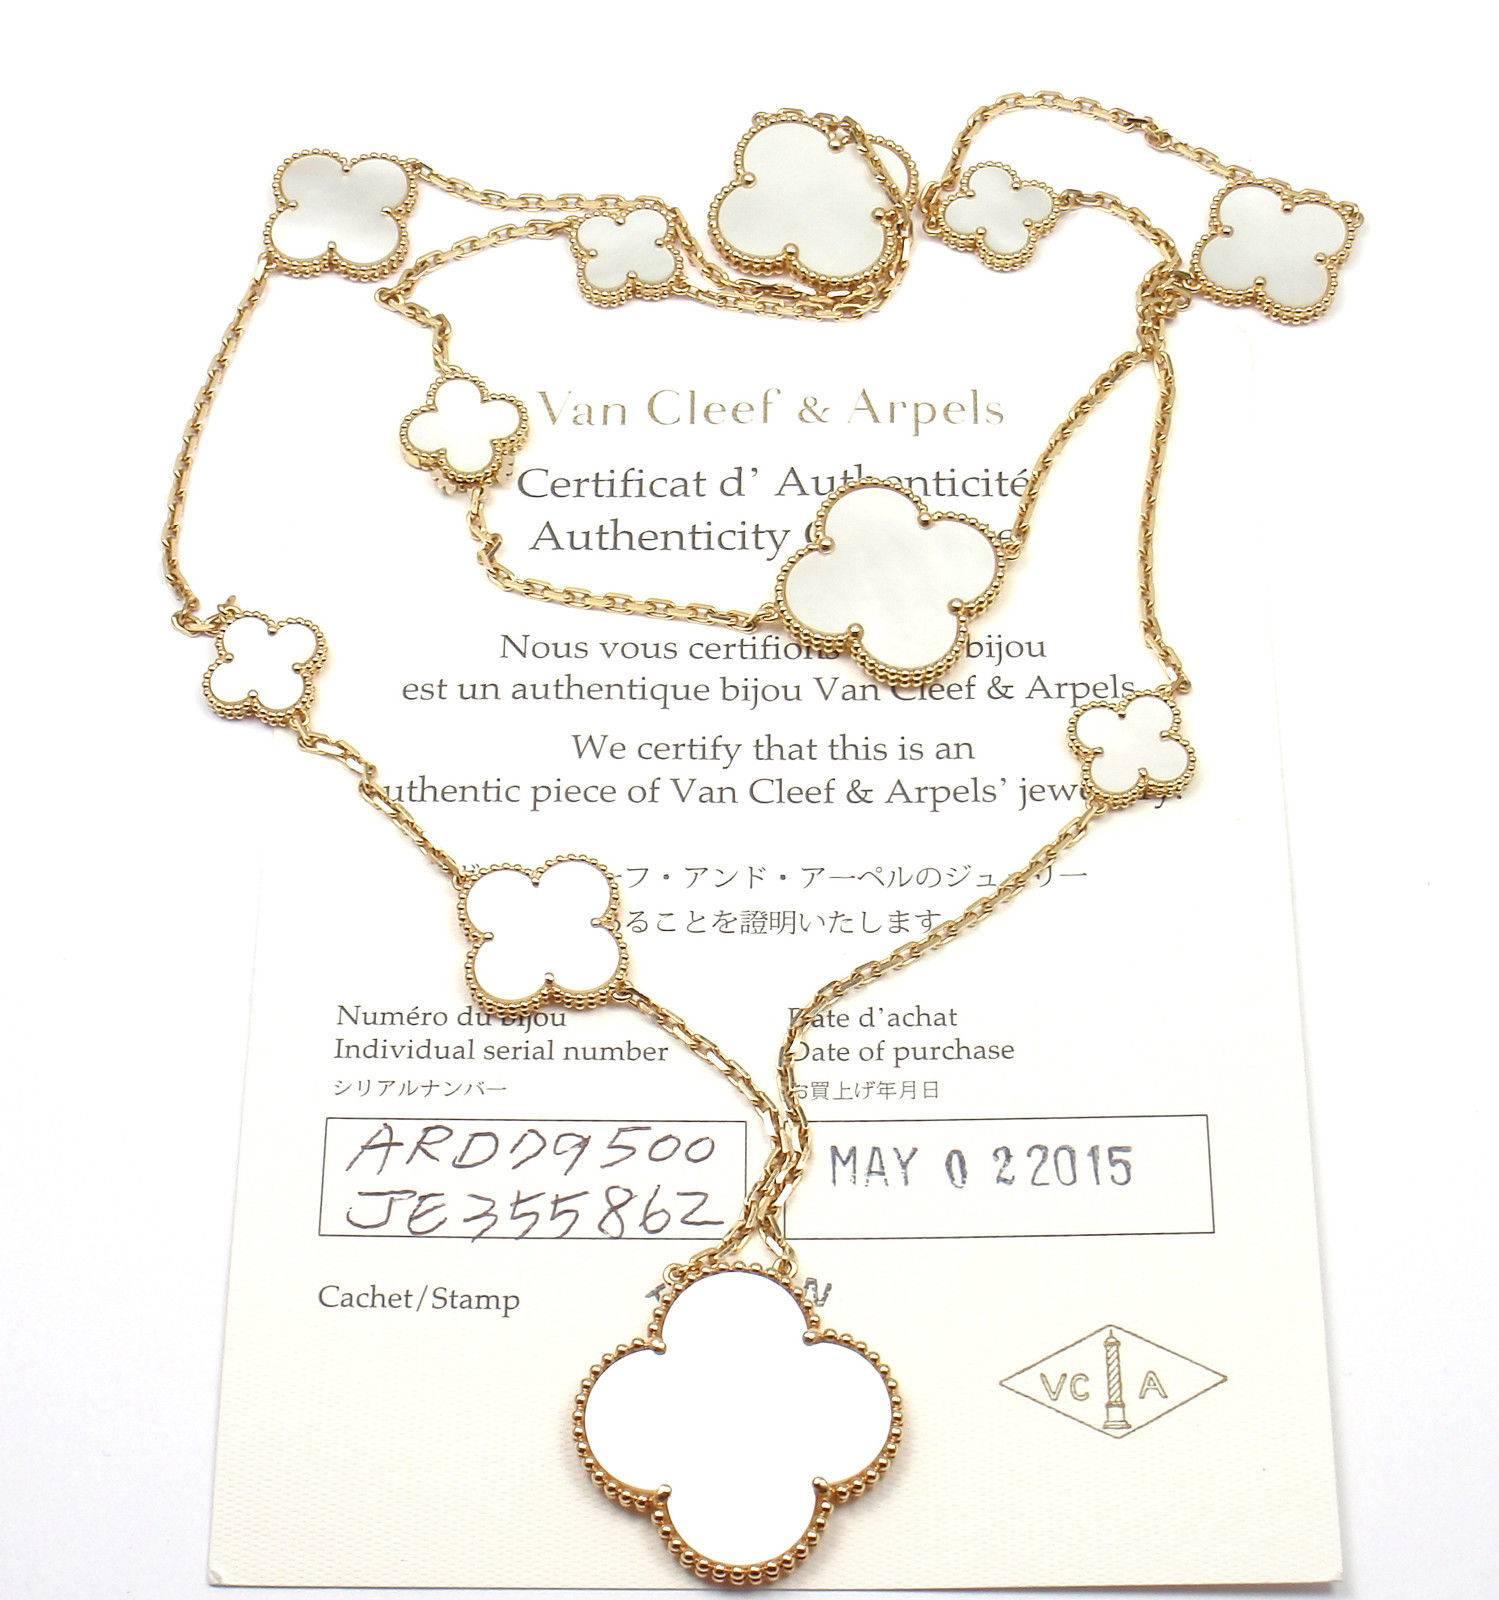 18k Yellow Gold Magic Alhambra Mother of Pearl 11 Motifs Necklace by Van Cleef Arpels. 
With 1 - 33mm white mother of pearl alhambras
2 - 26mm white mother of pearl alhambras
3 - 21mm white mother of pearl alhambras
5 - 15mm white mother of pearl